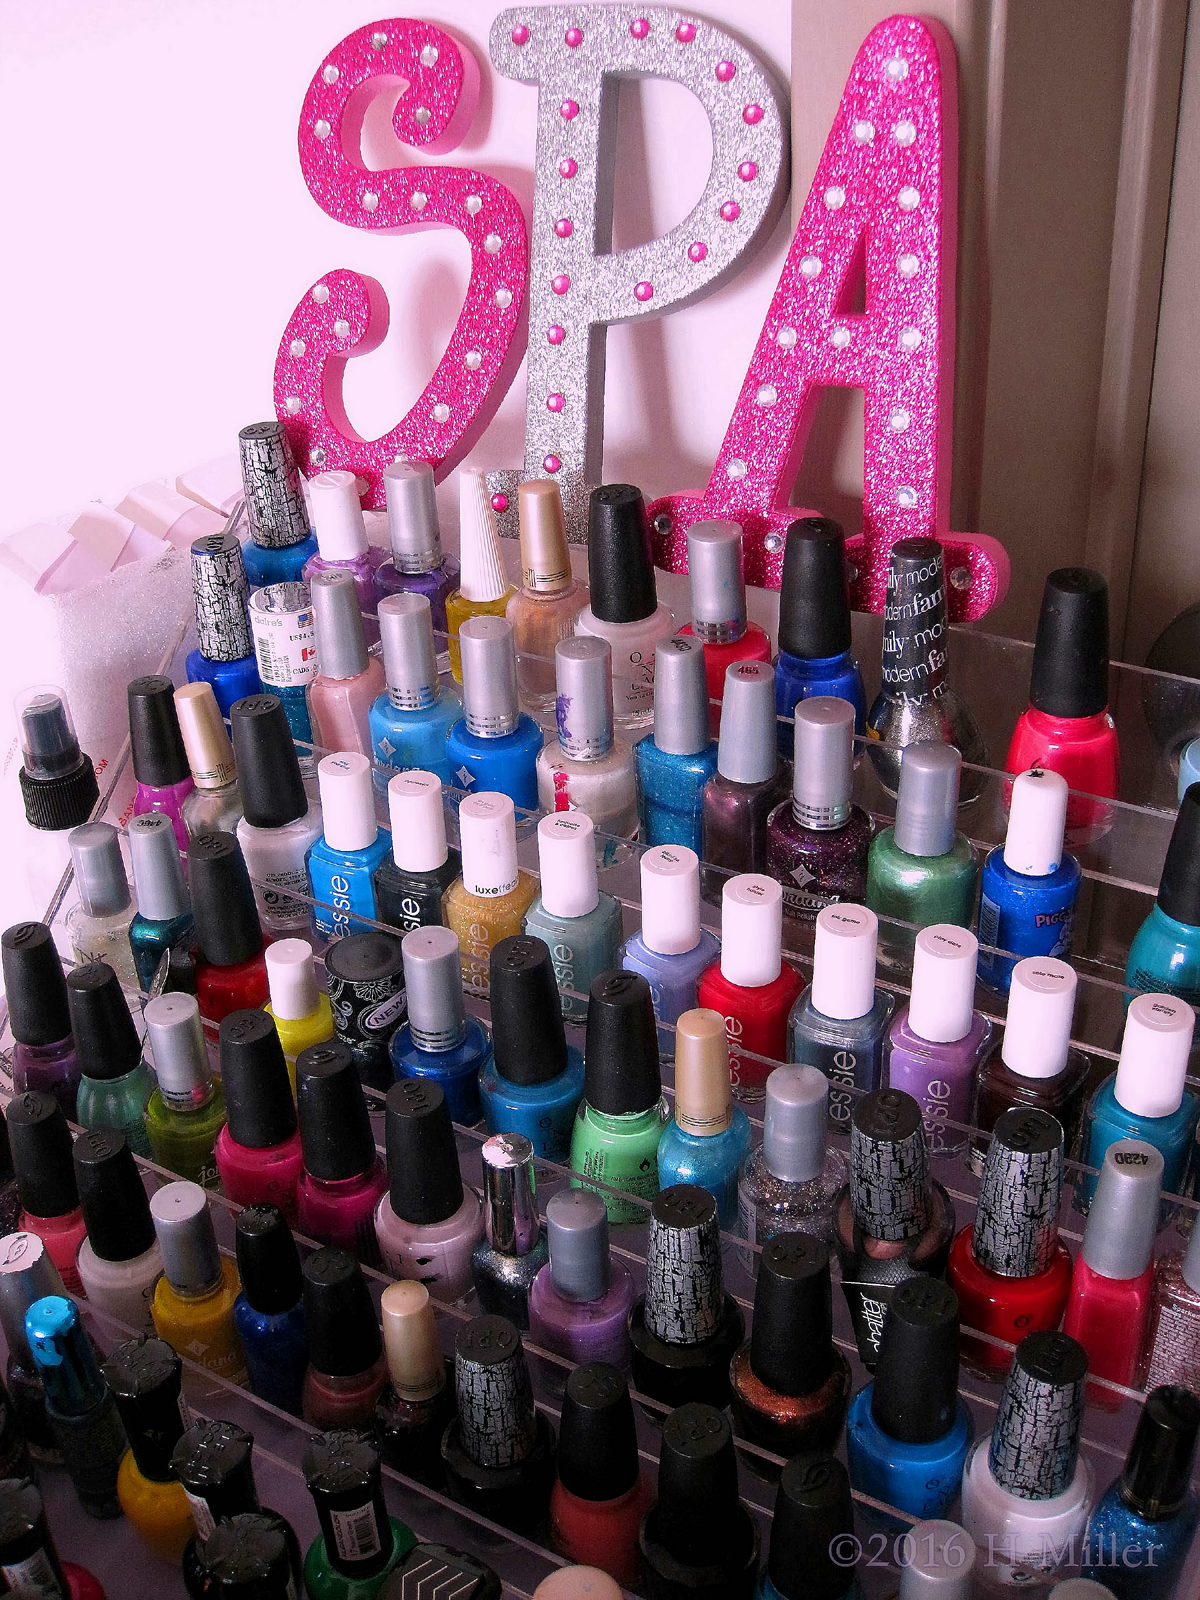 An Amazing Collection Of Nail Polish For The Kids Spa! 